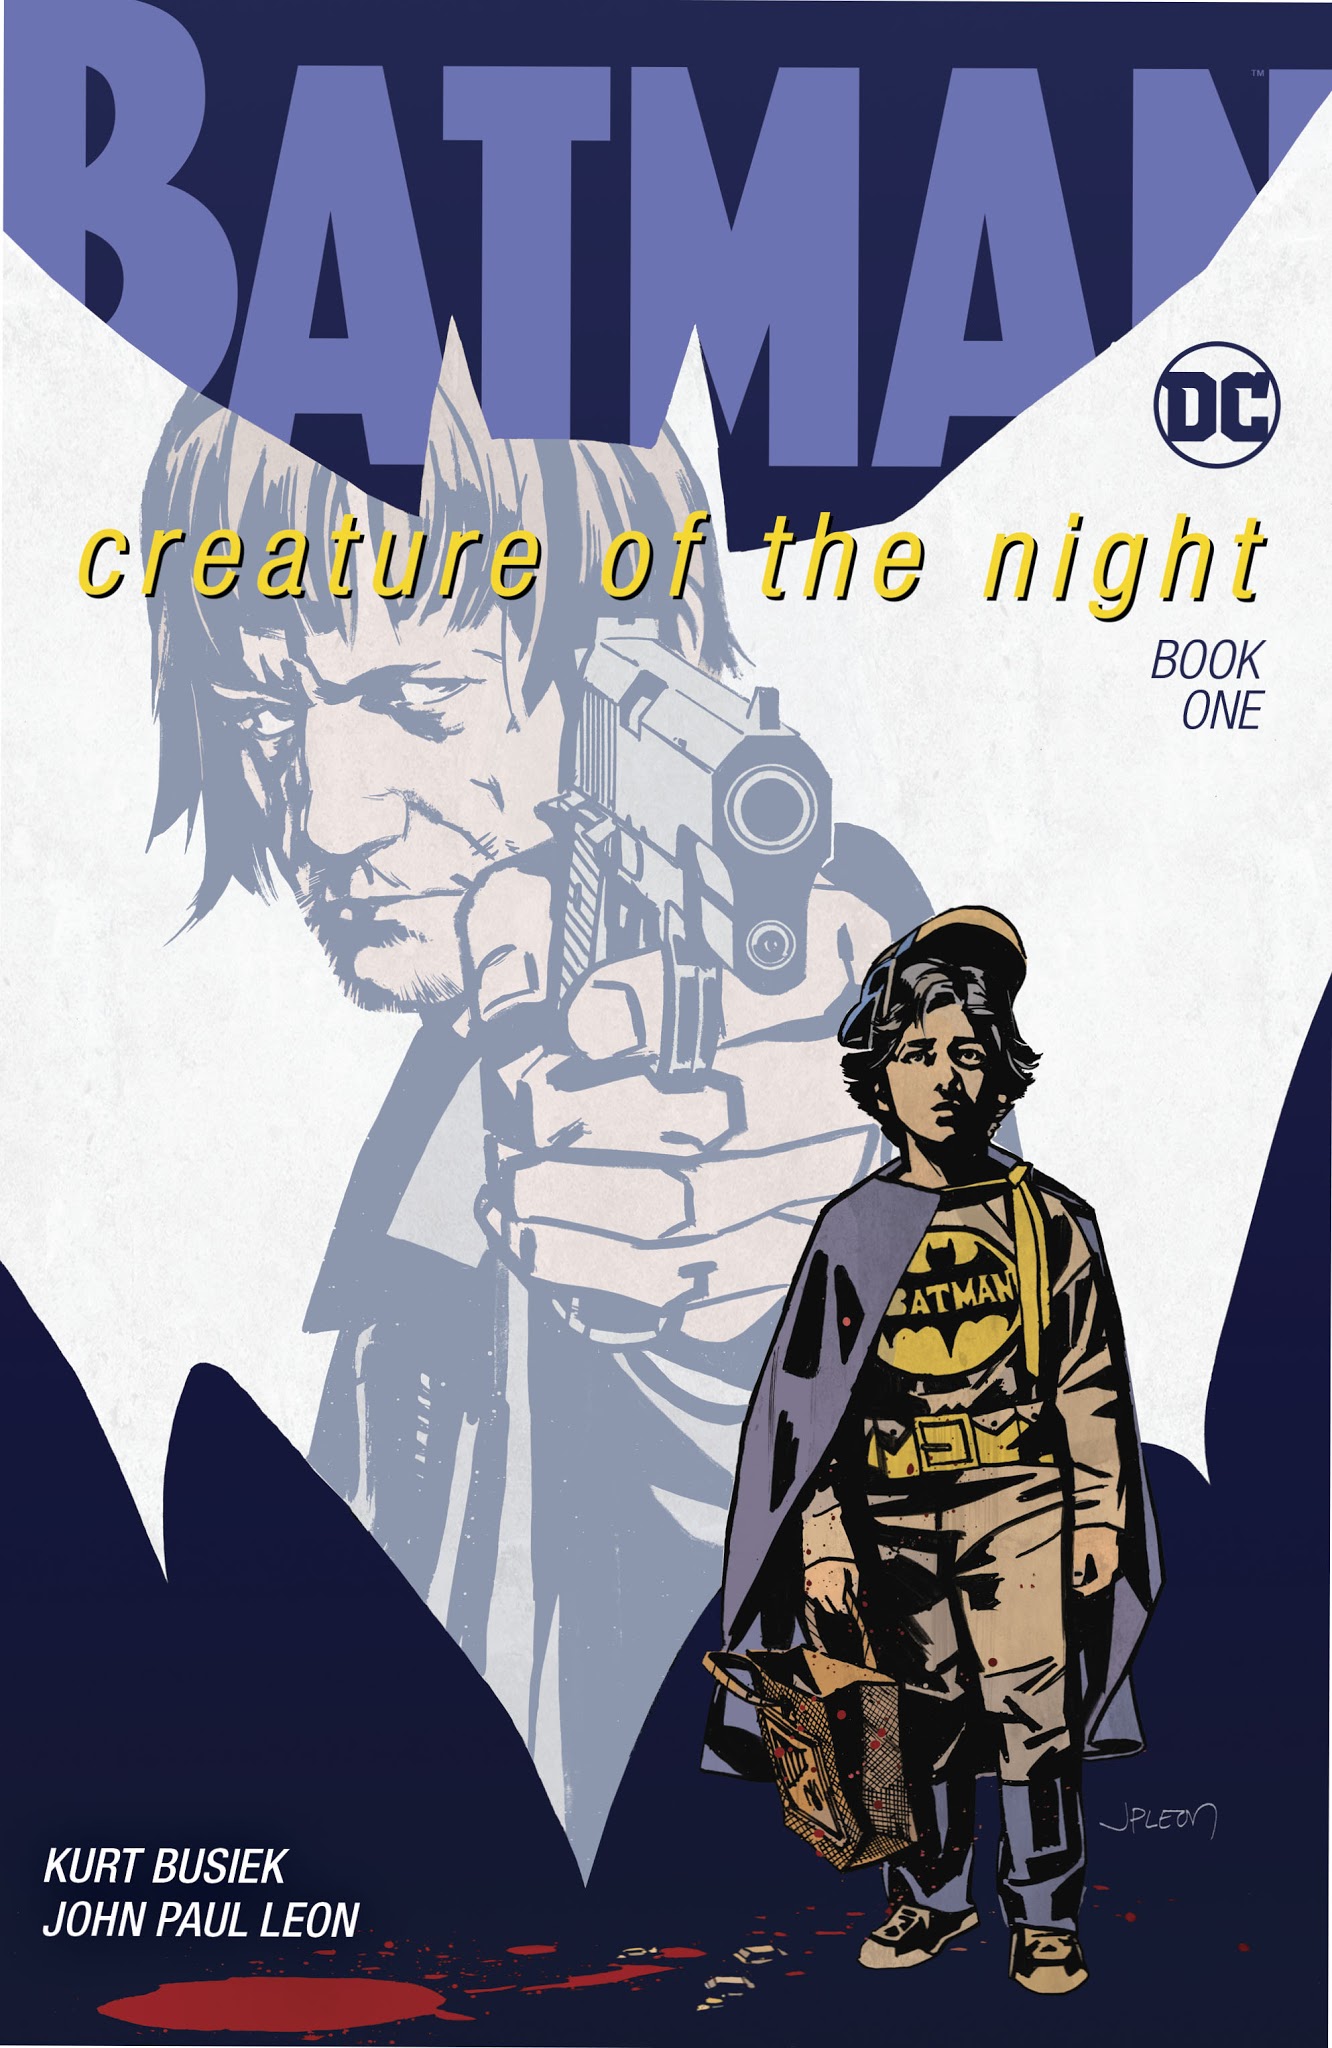 Read online Batman: Creature of the Night comic -  Issue #1 - 1